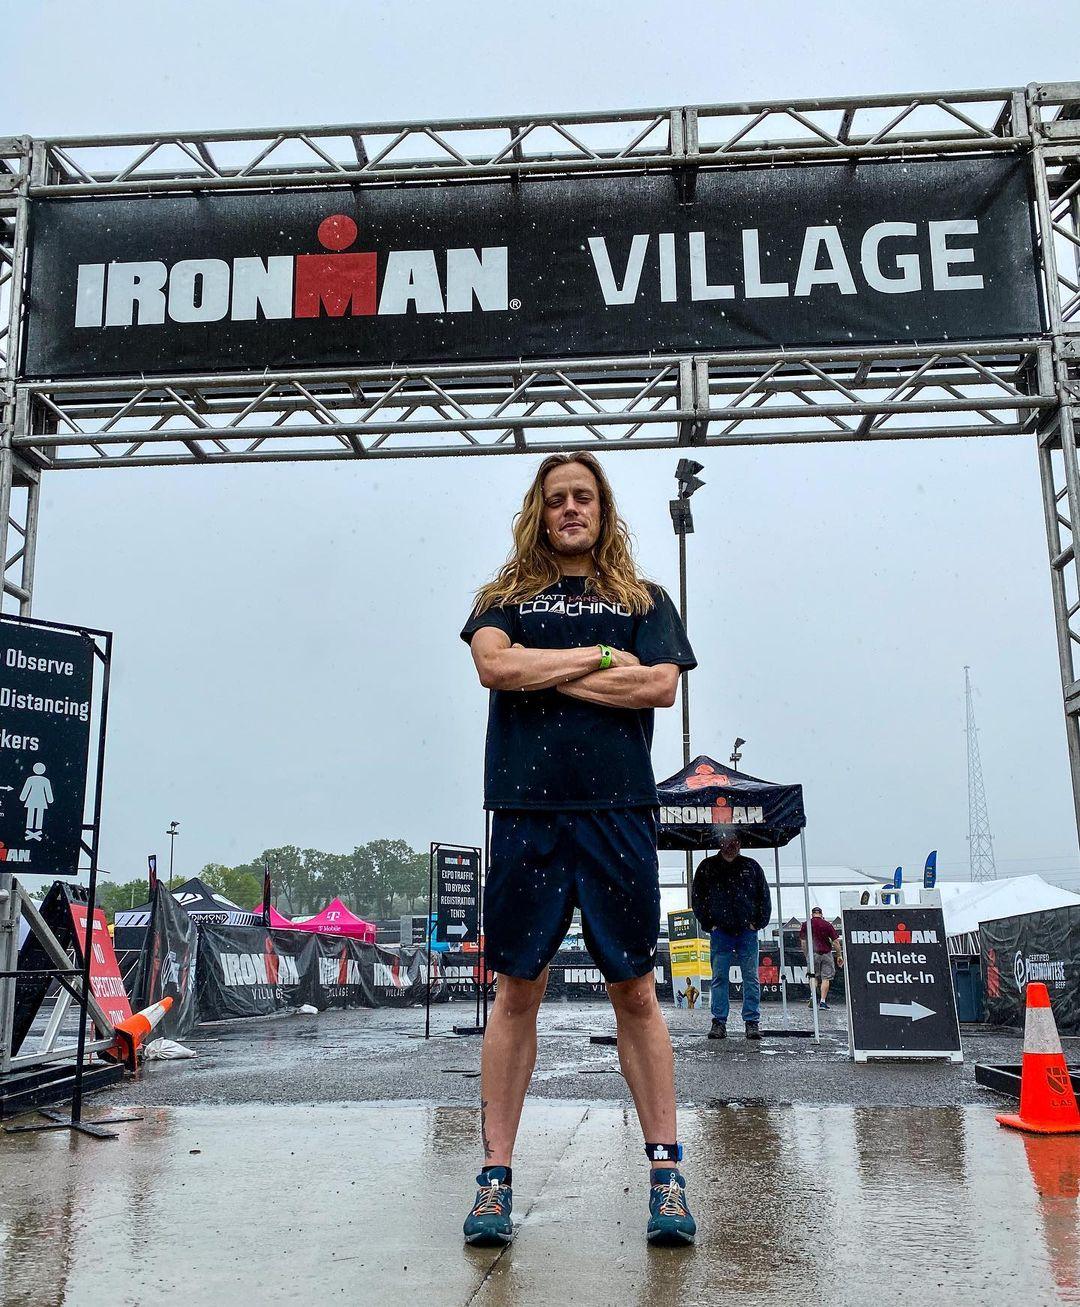 Noel Mulkey finished the 2021 Tulsa Ironman Triathlon on May 23 to qualify for the Ironman World Championship in Hawaii. (Courtesy of <a href="https://www.instagram.com/noelmulkey/">Noel Mulkey</a>)